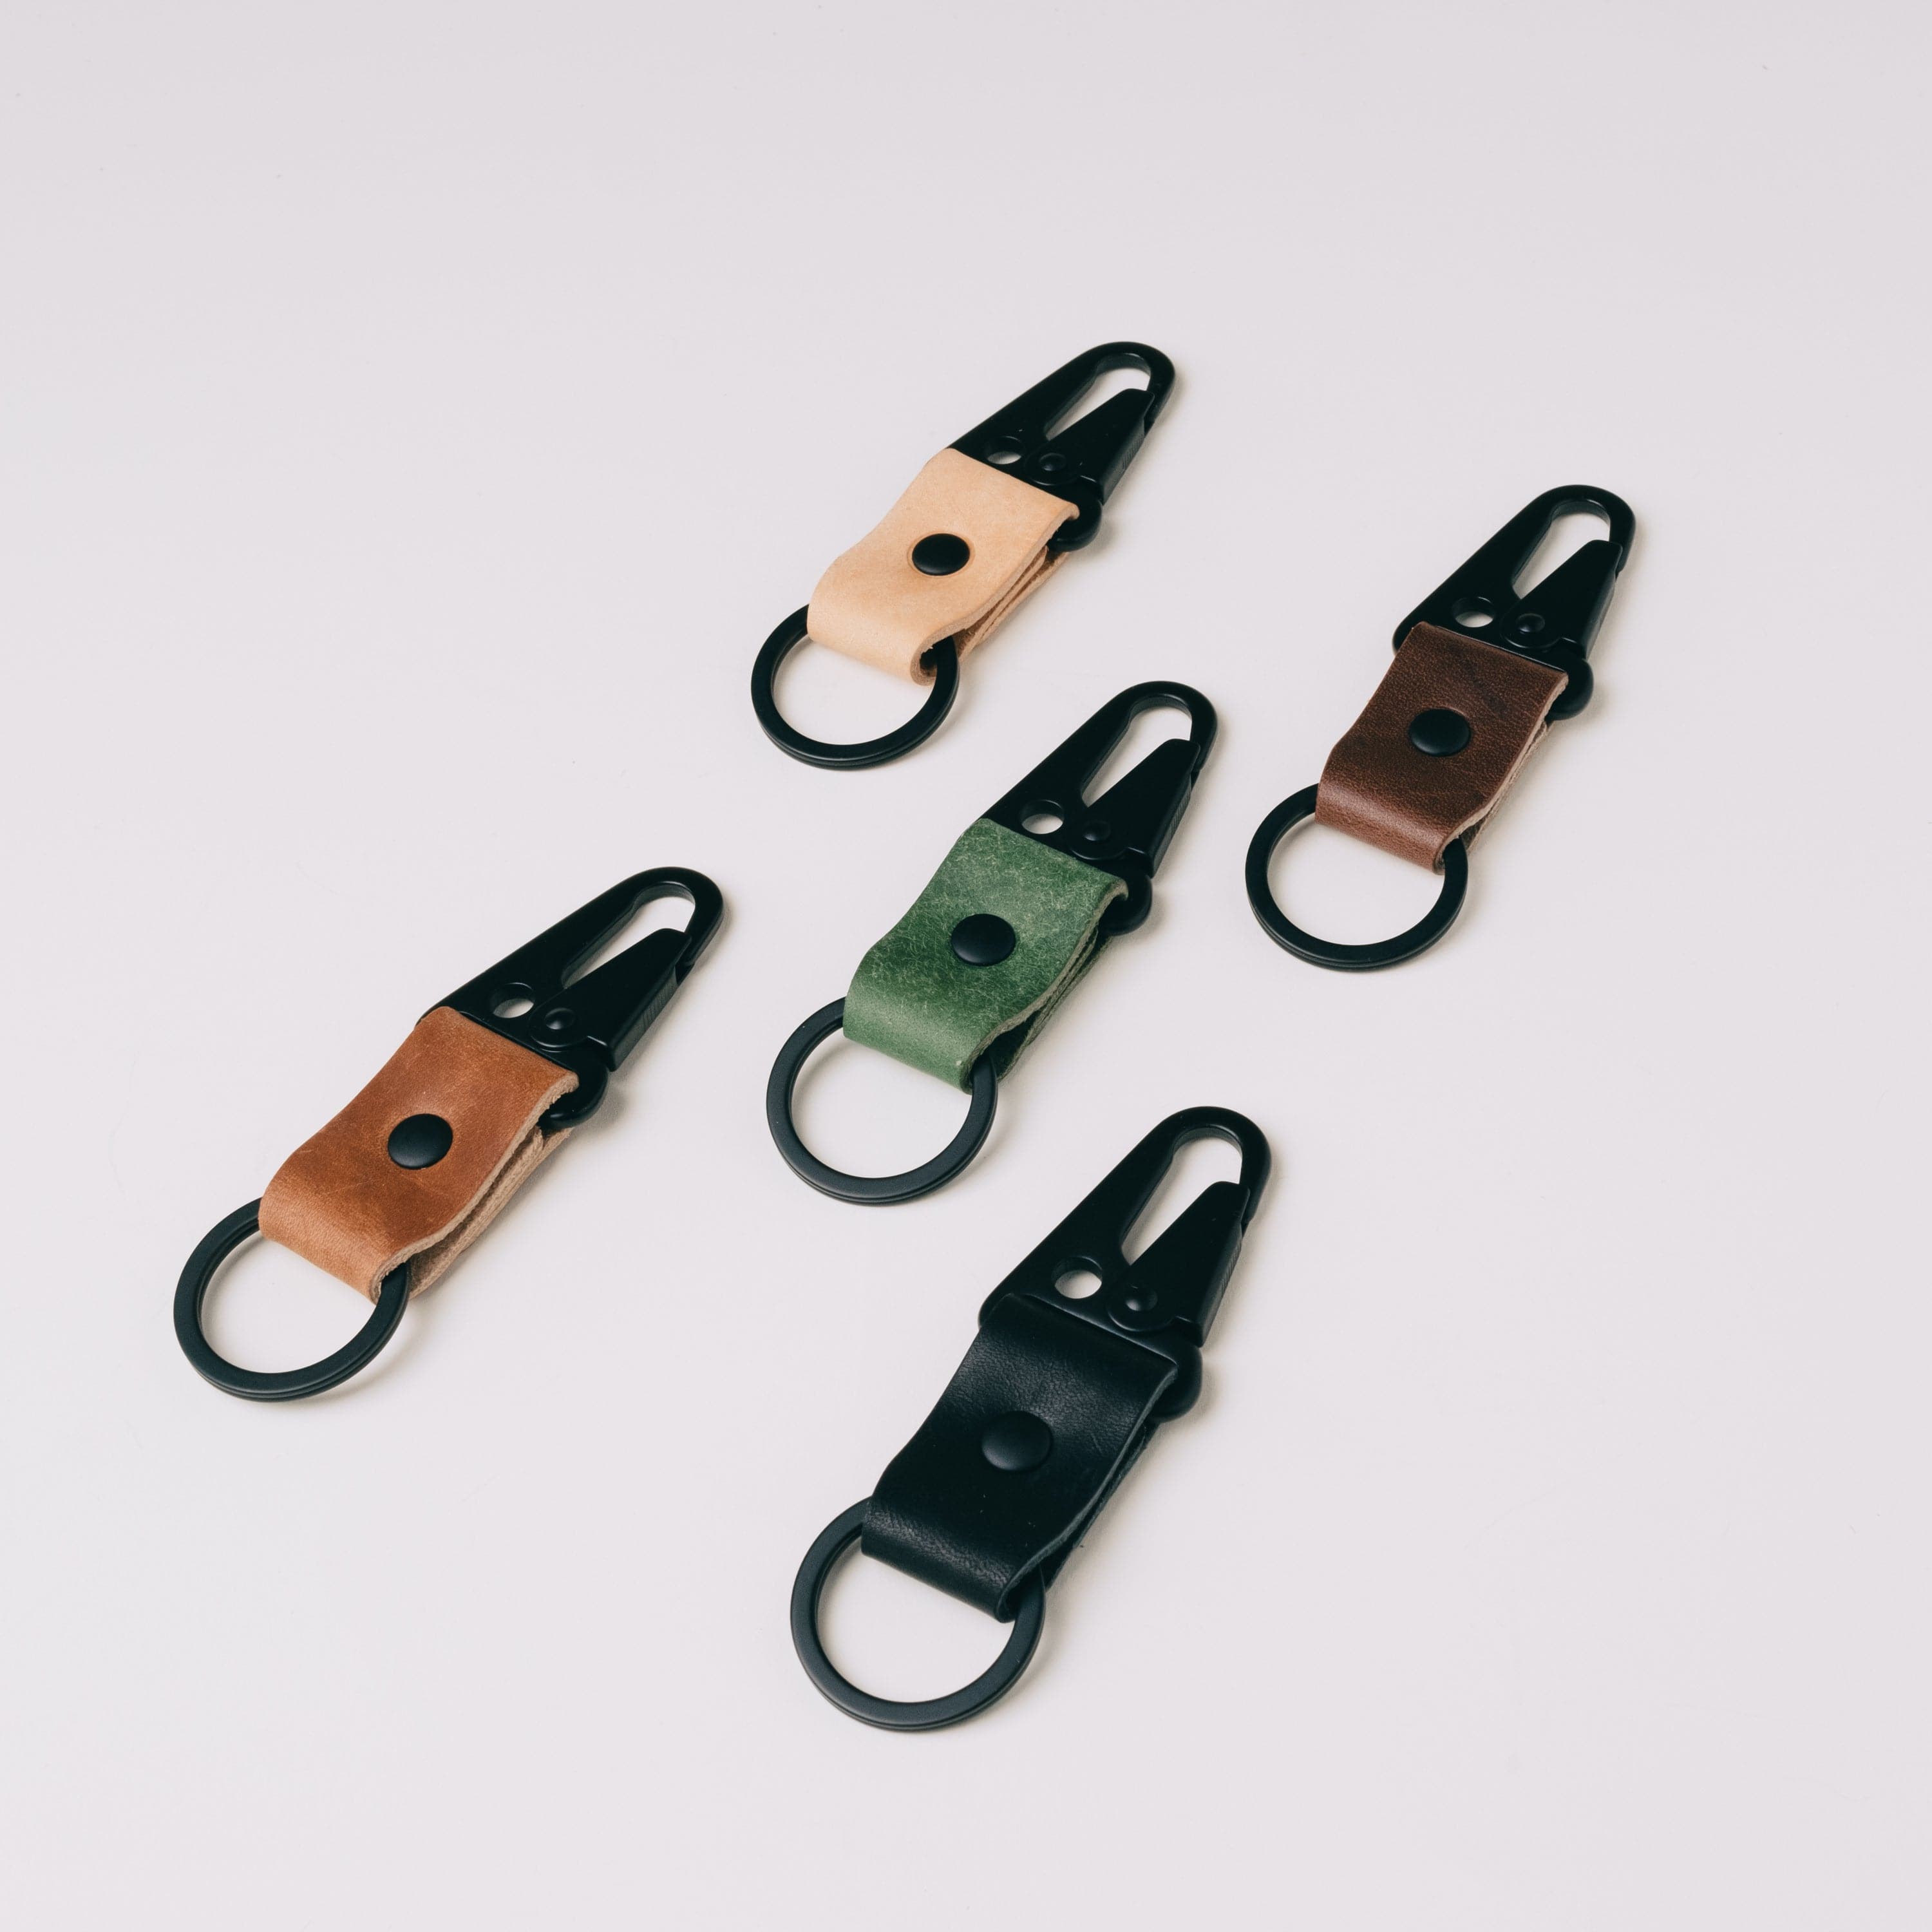 Key clips ? - Suppliers 